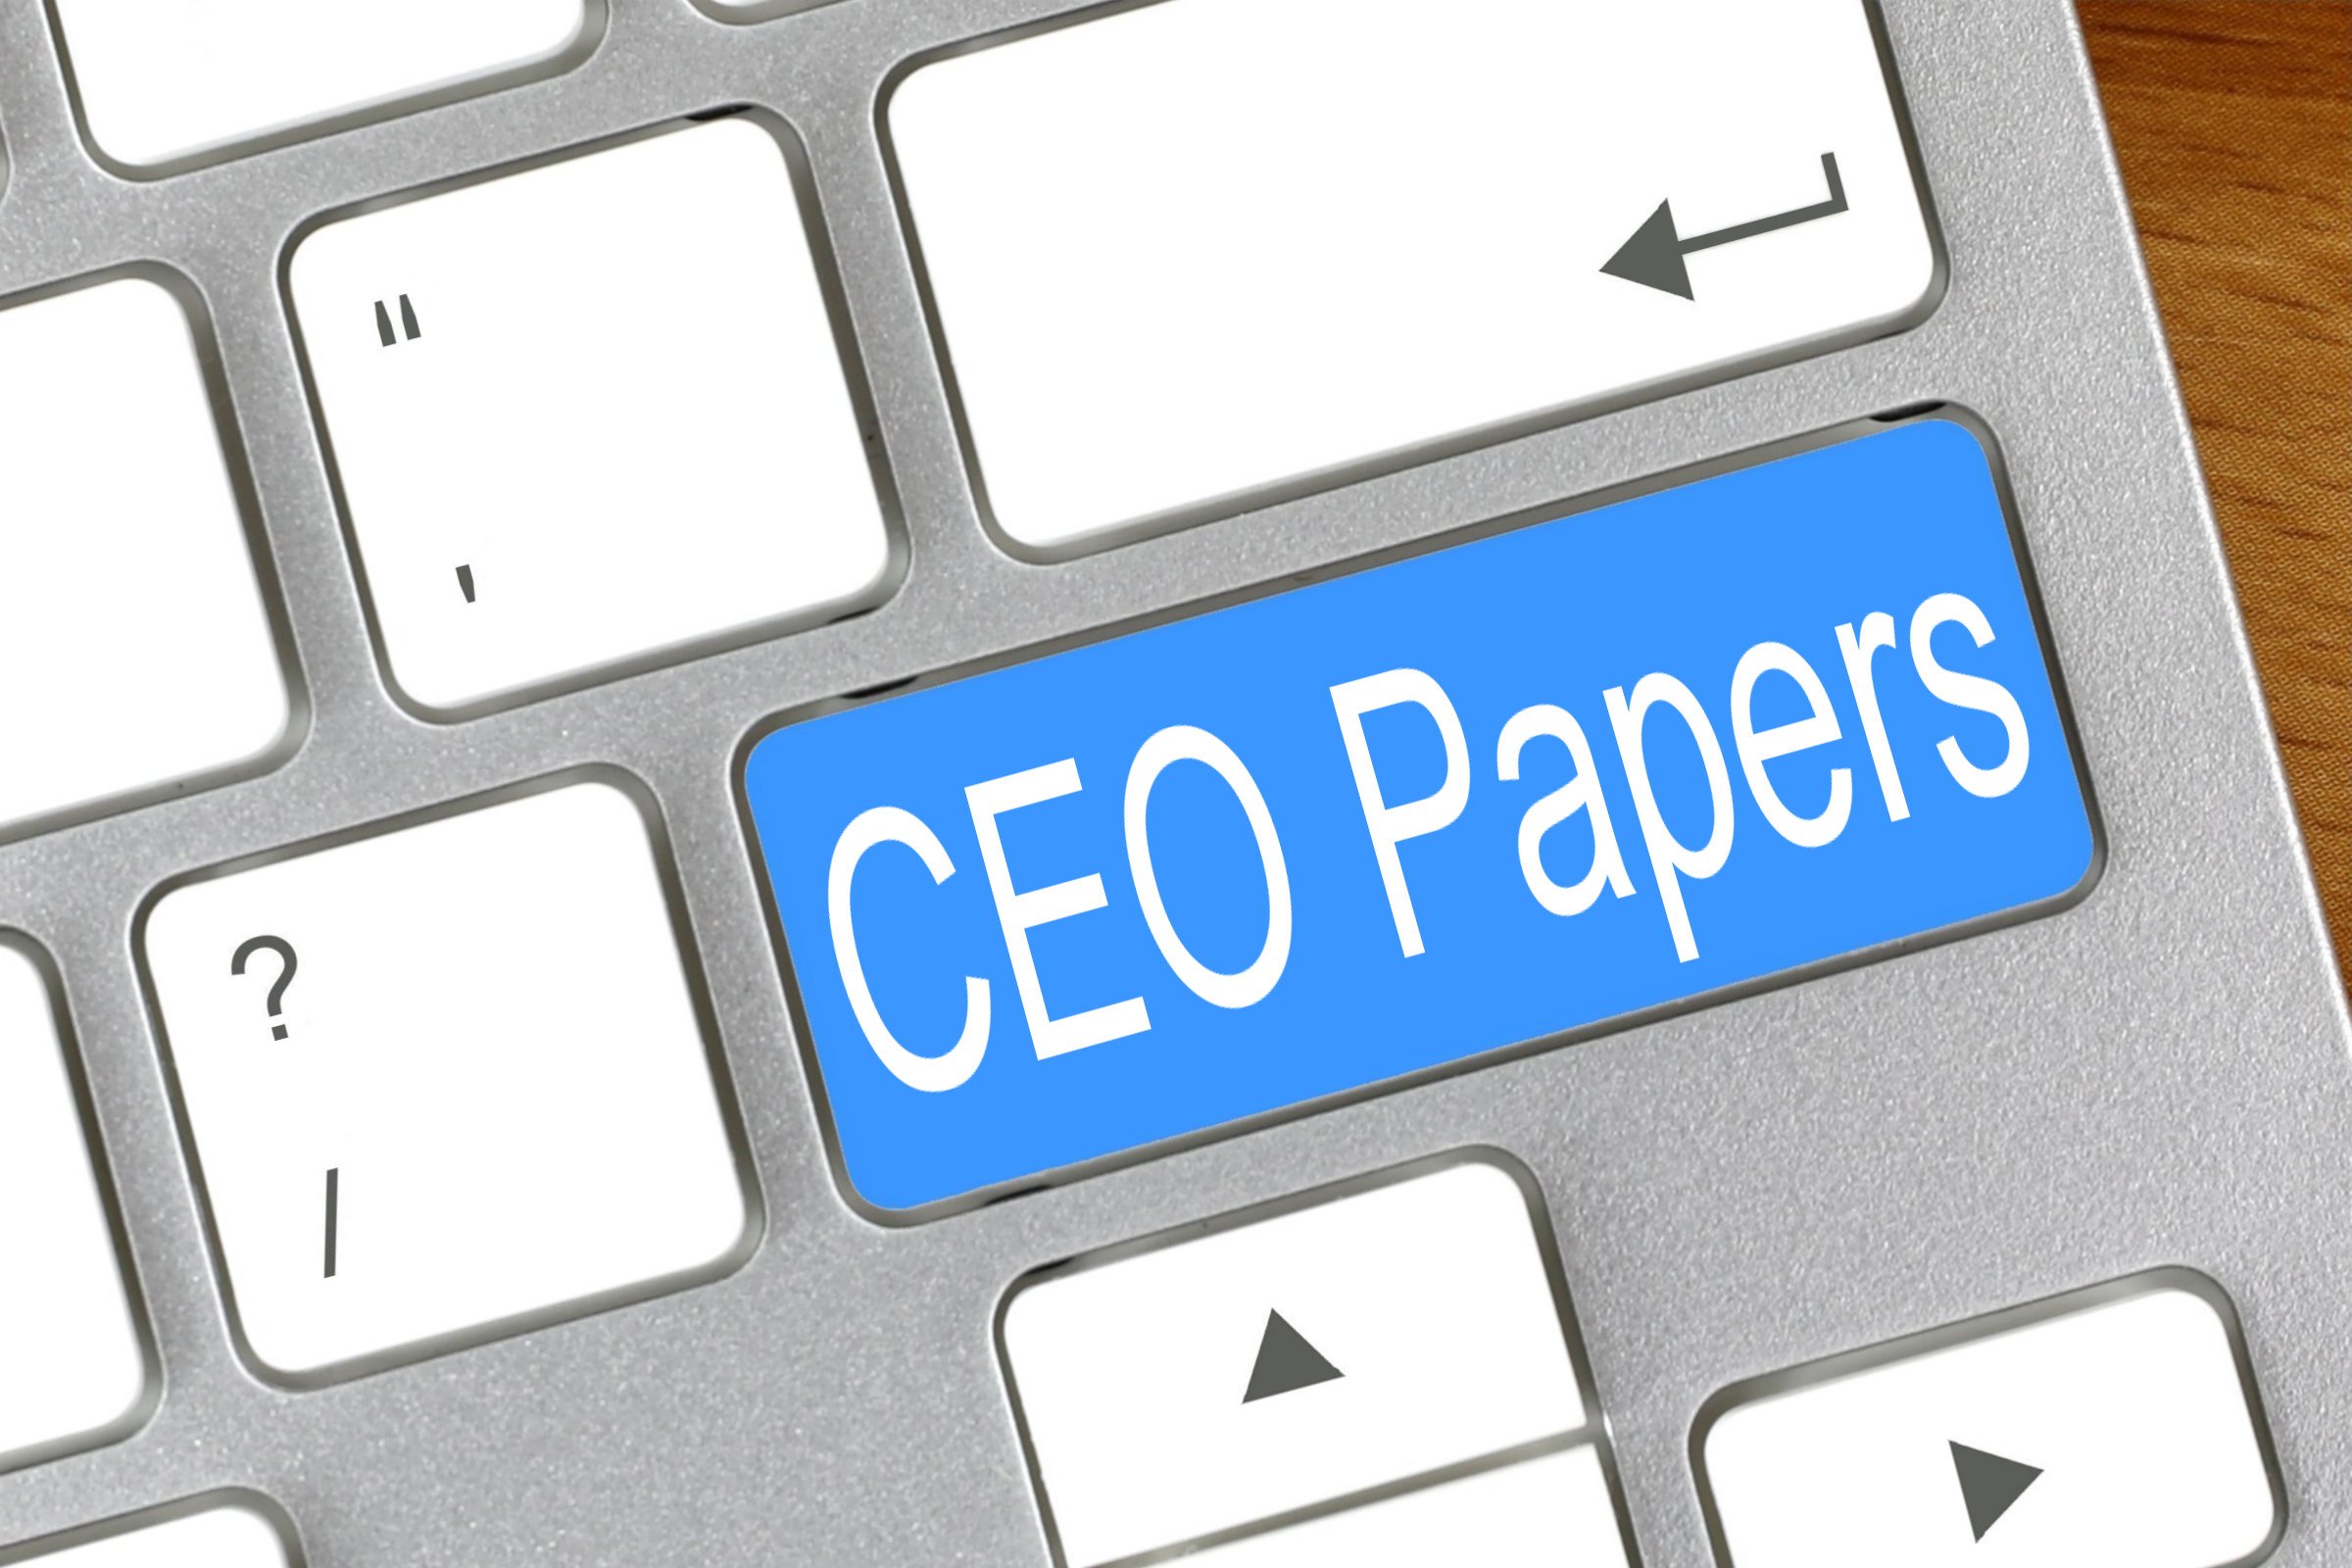 ceo papers